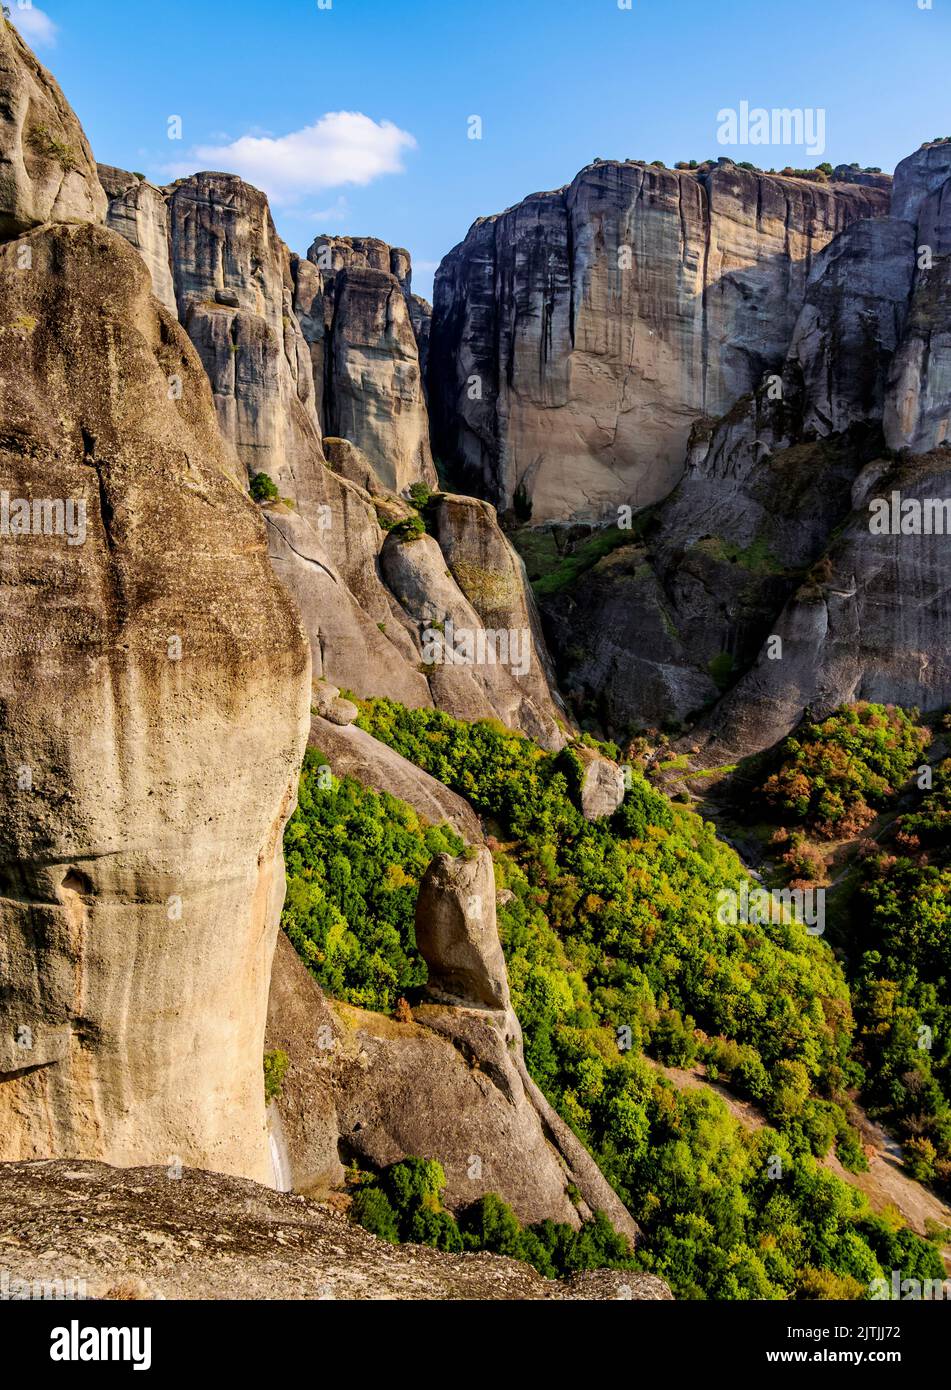 Small Spindle Rock, elevated view, Meteora, Thessaly, Greece Stock Photo